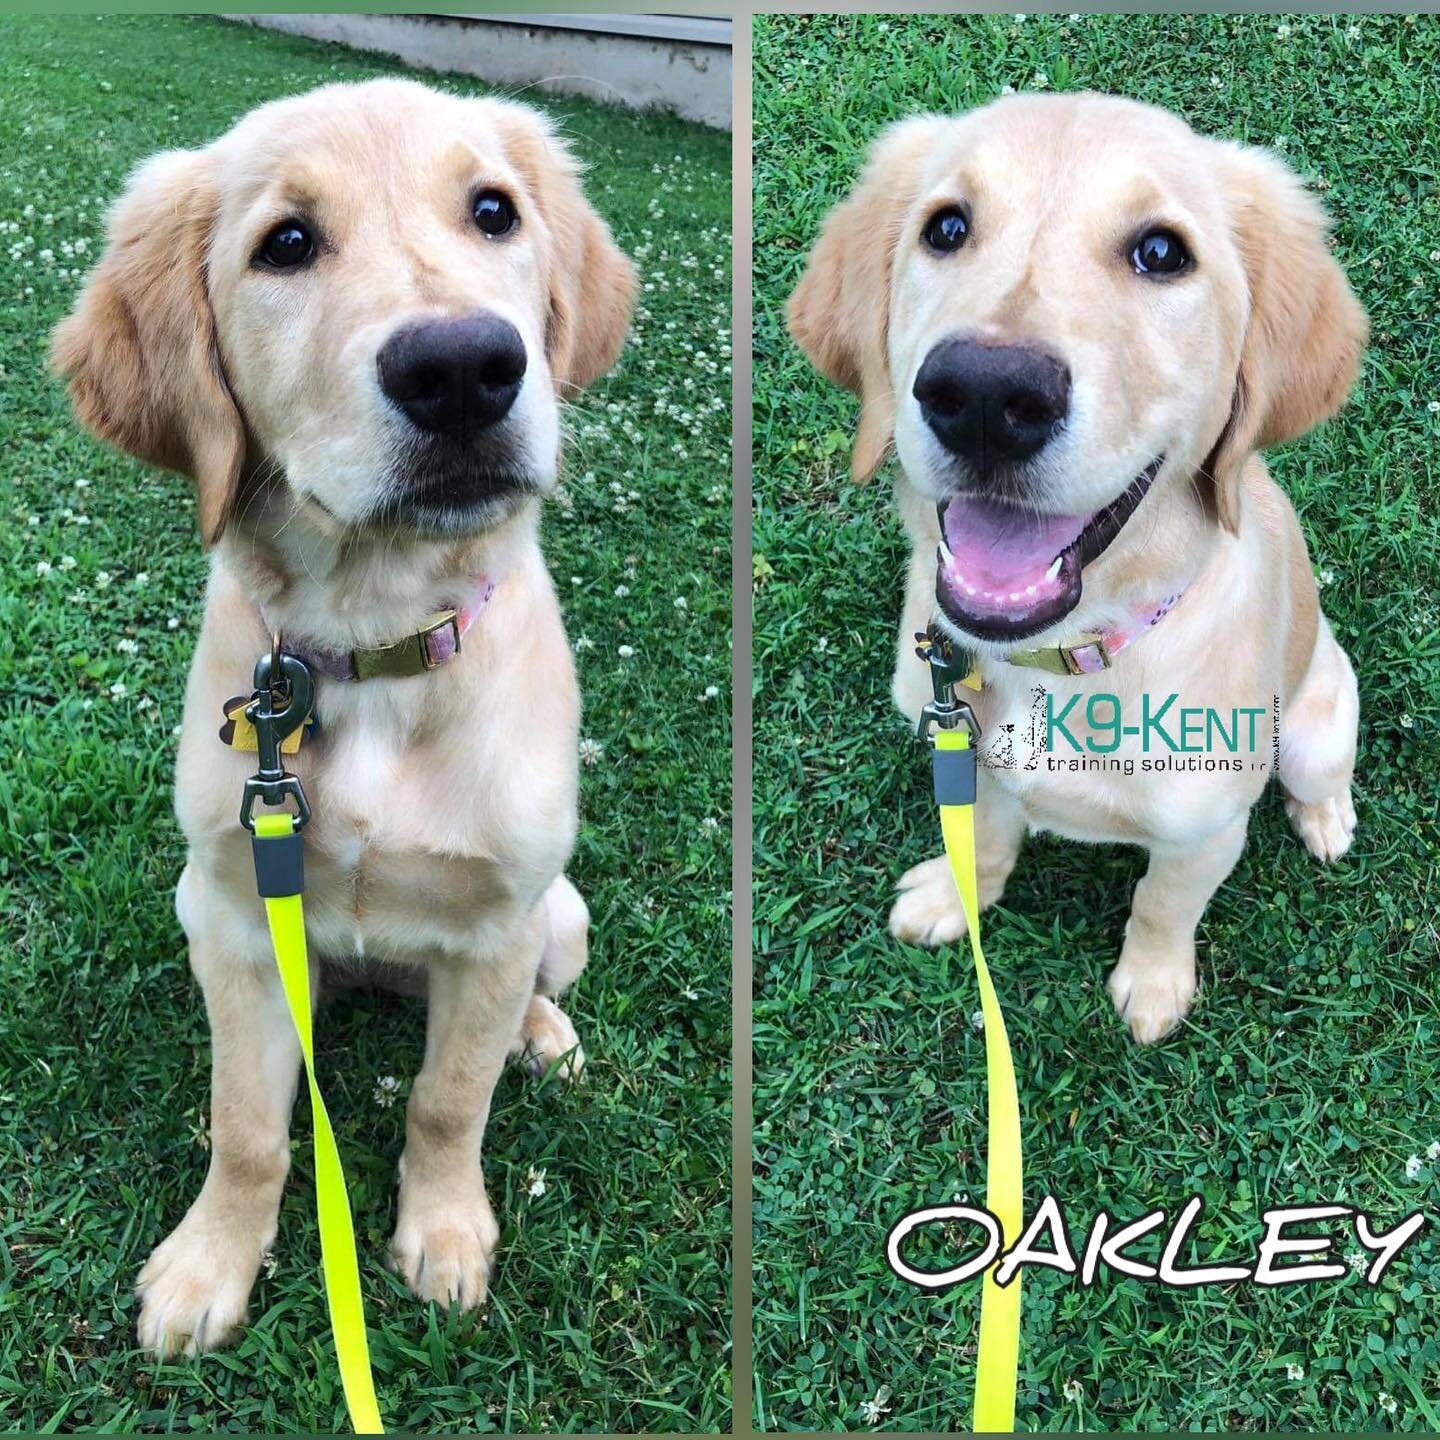 Welcome to Golden Retriever 🐾OAKLEY🐾 

She will go through our 3 week Puppy Board &amp; Train Program with trainer Allex @mama_hubbs_ 😍🎉🐾☺️

She is 4 month young and needs to work on
⚫️ basic manners &amp; commands 
⚫️ kennel training 
⚫️ potty 